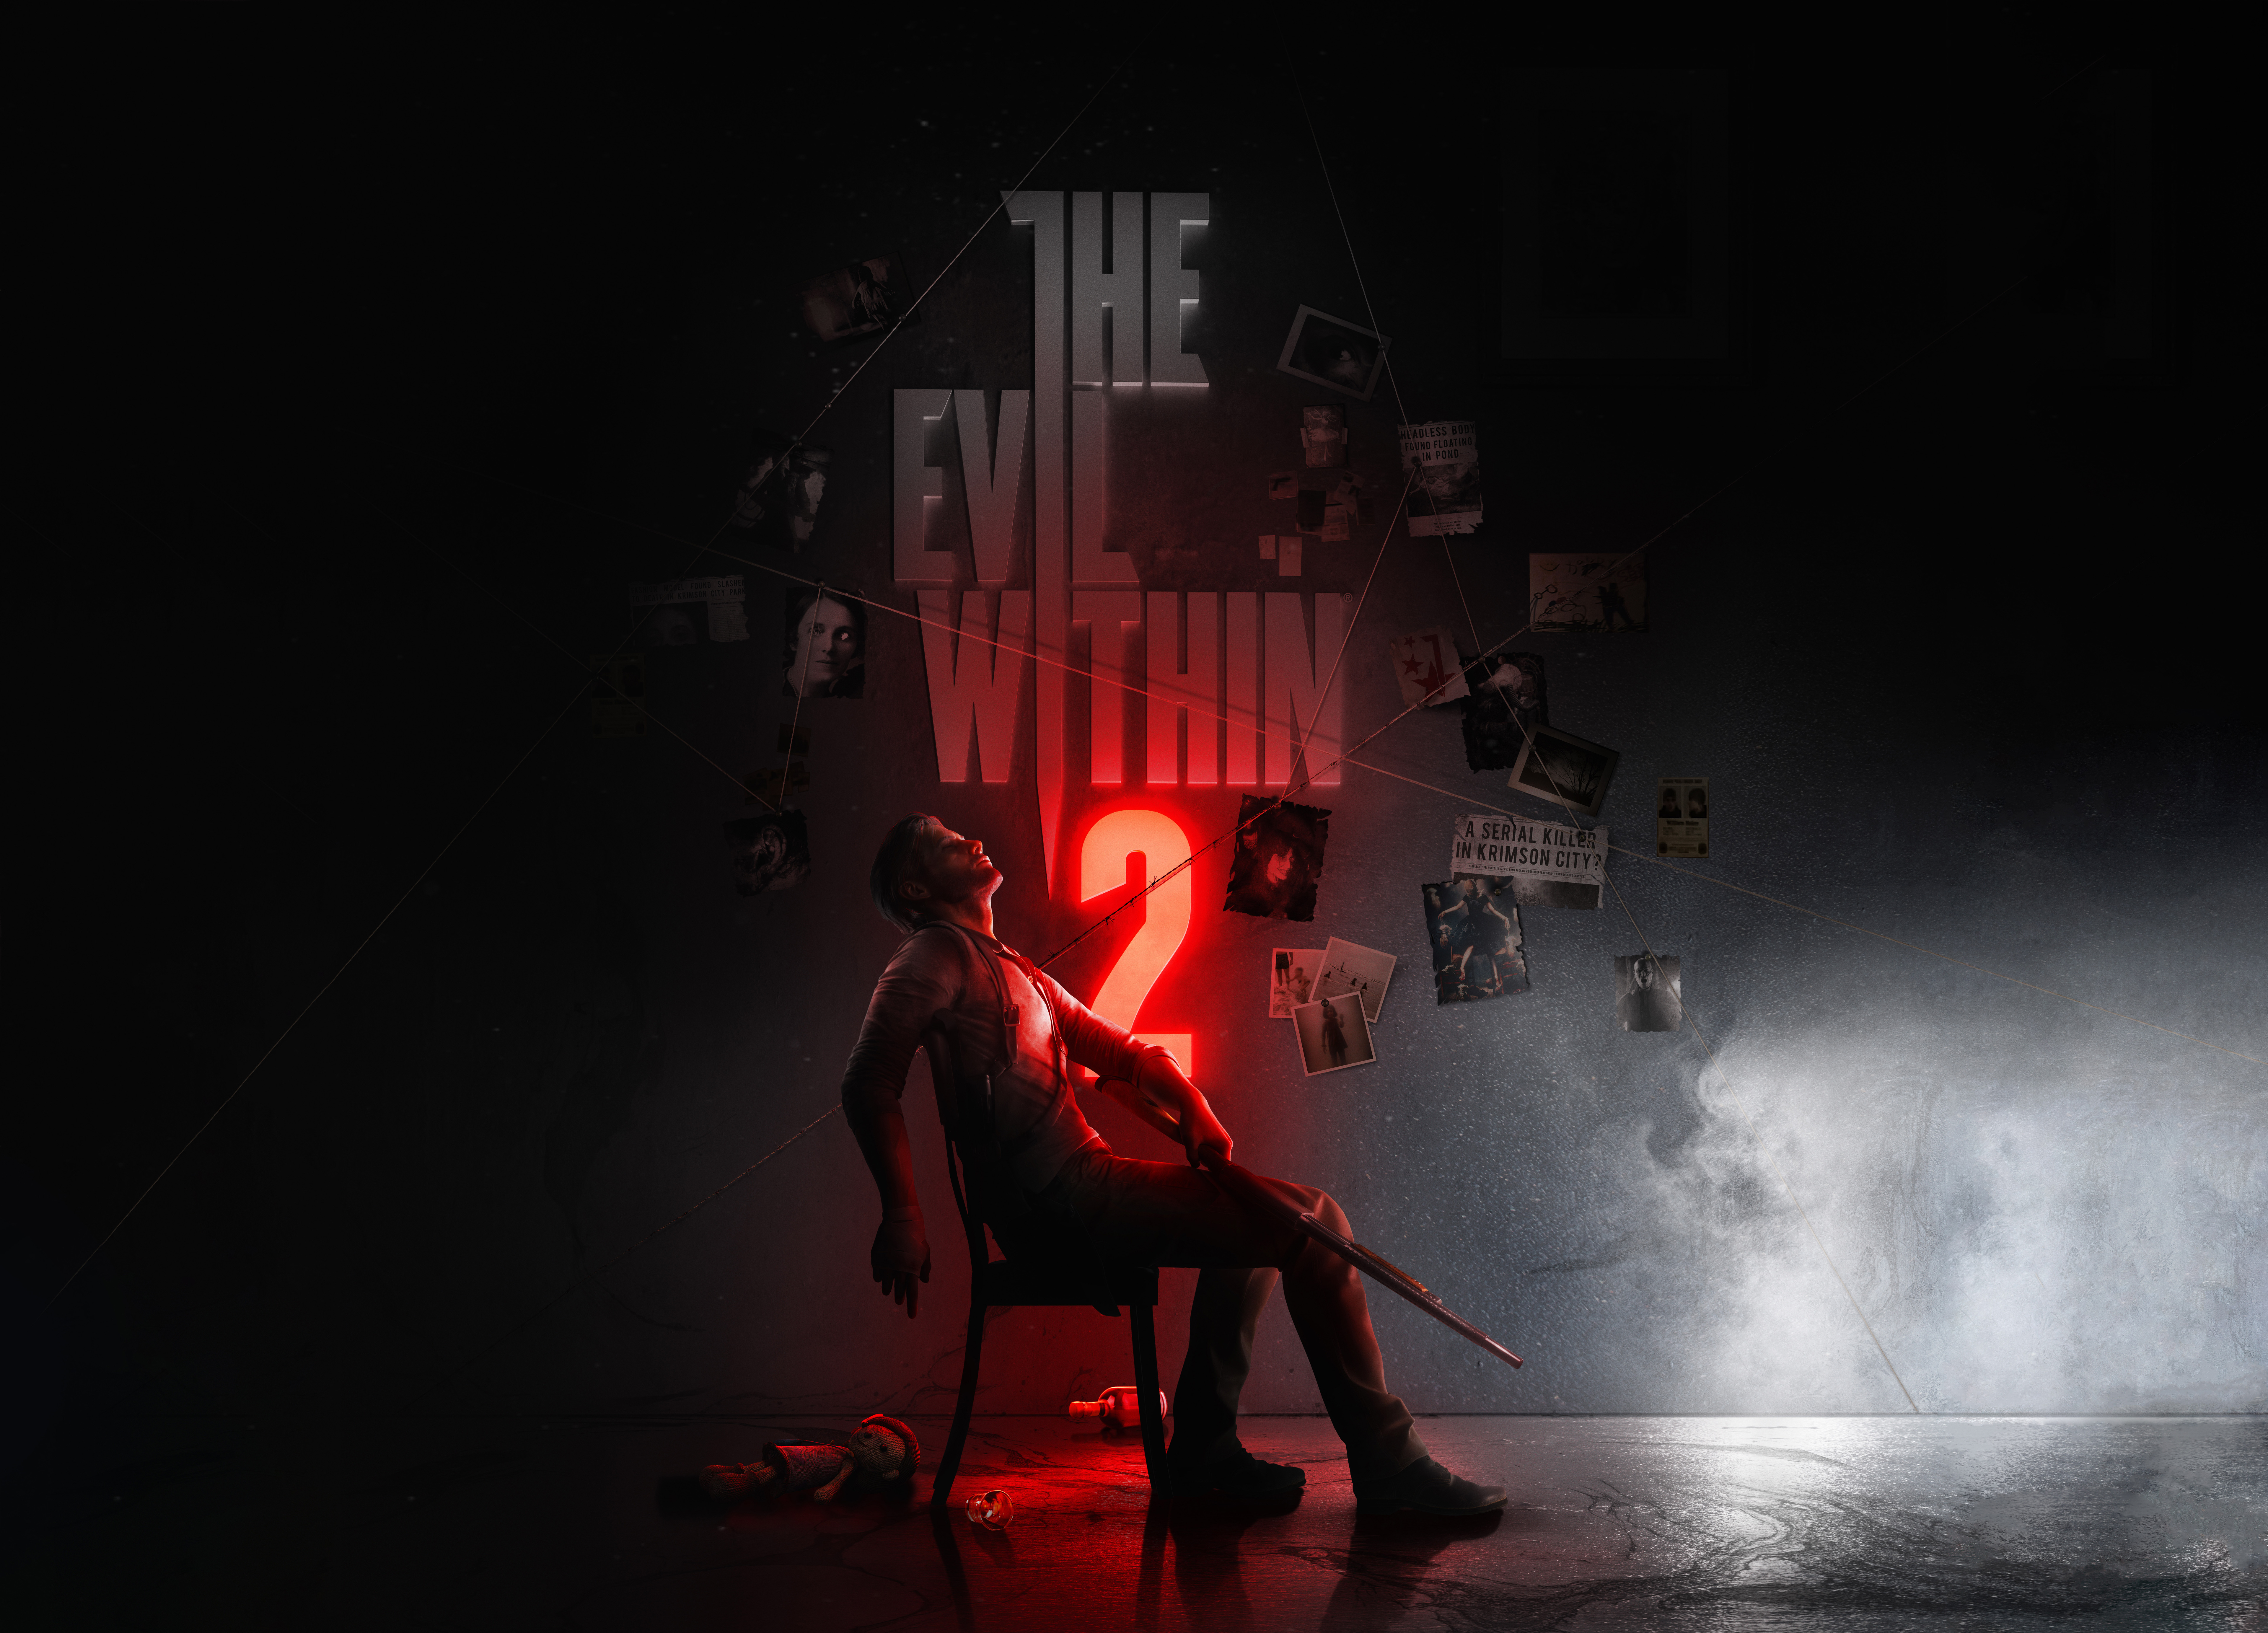 the evil within metacritic download free